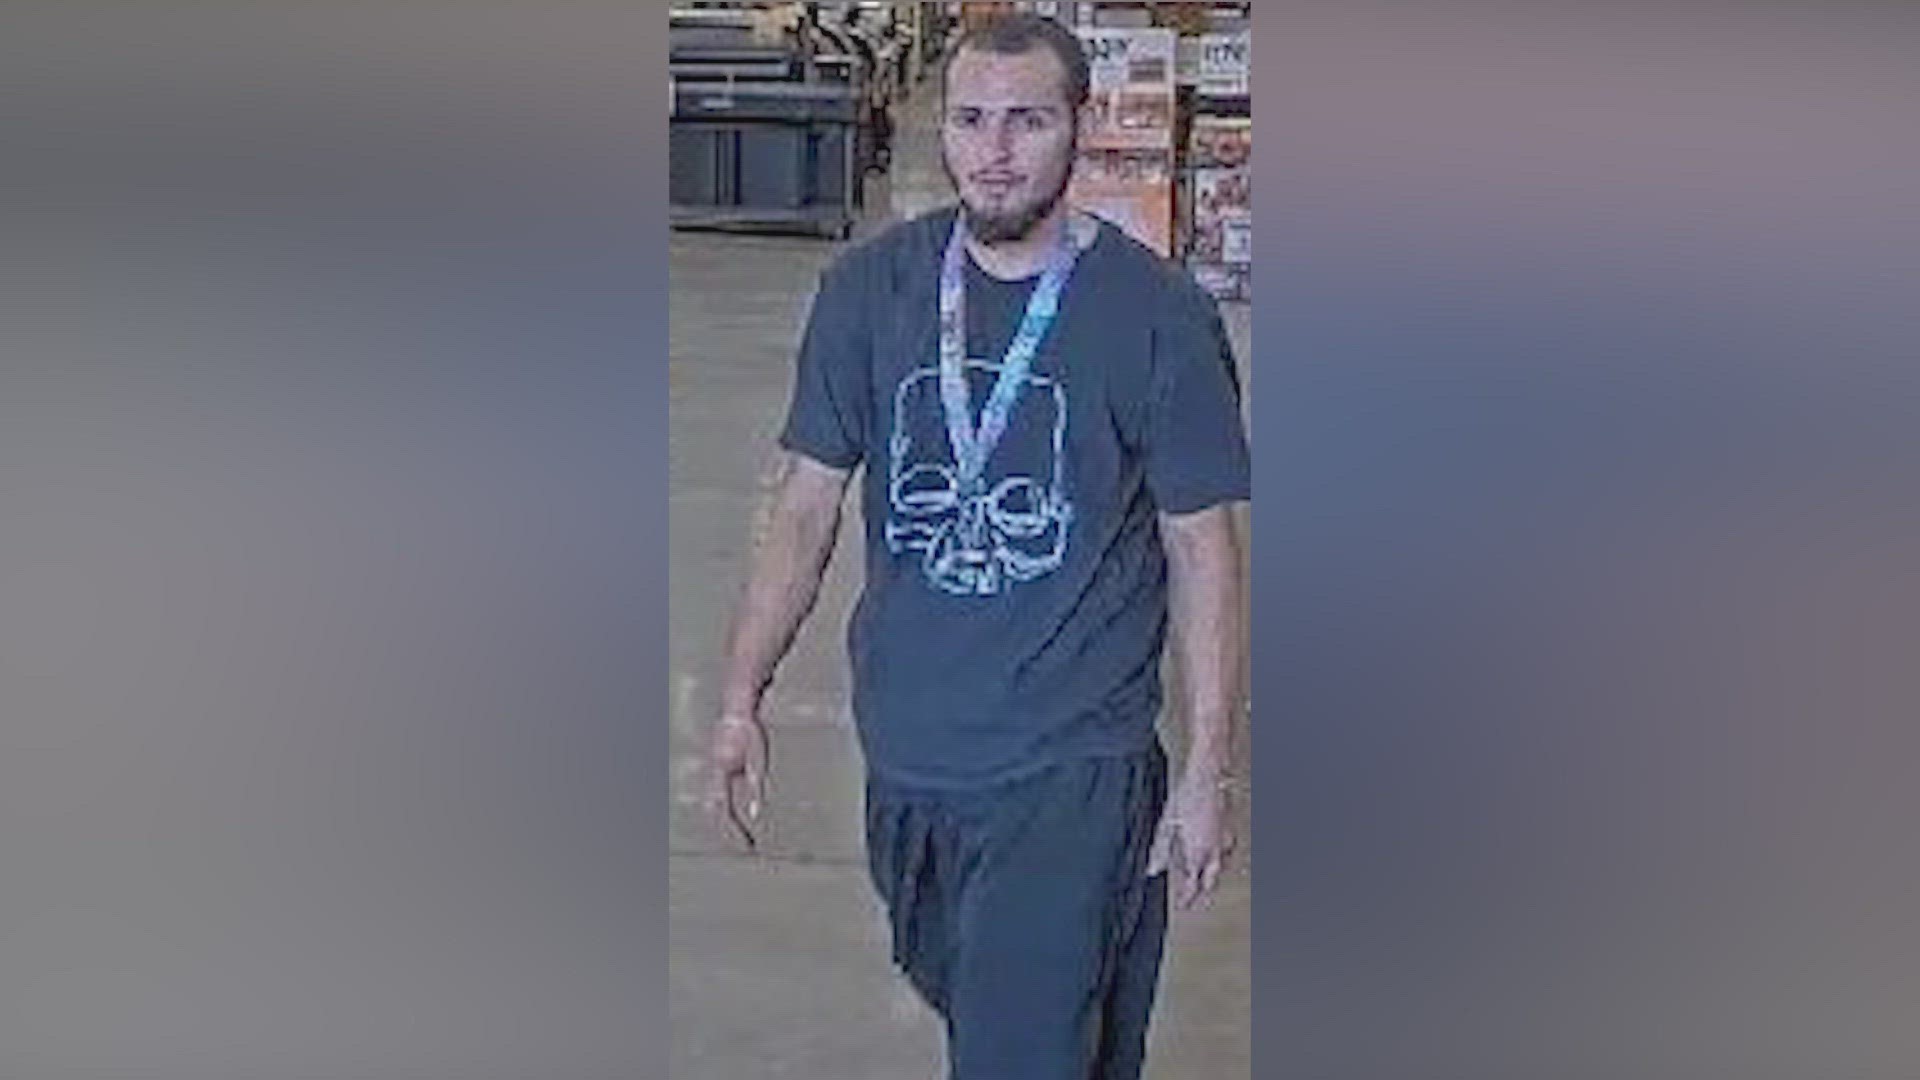 SAPD says this man tried to hide items as he walked past cashiers without paying.